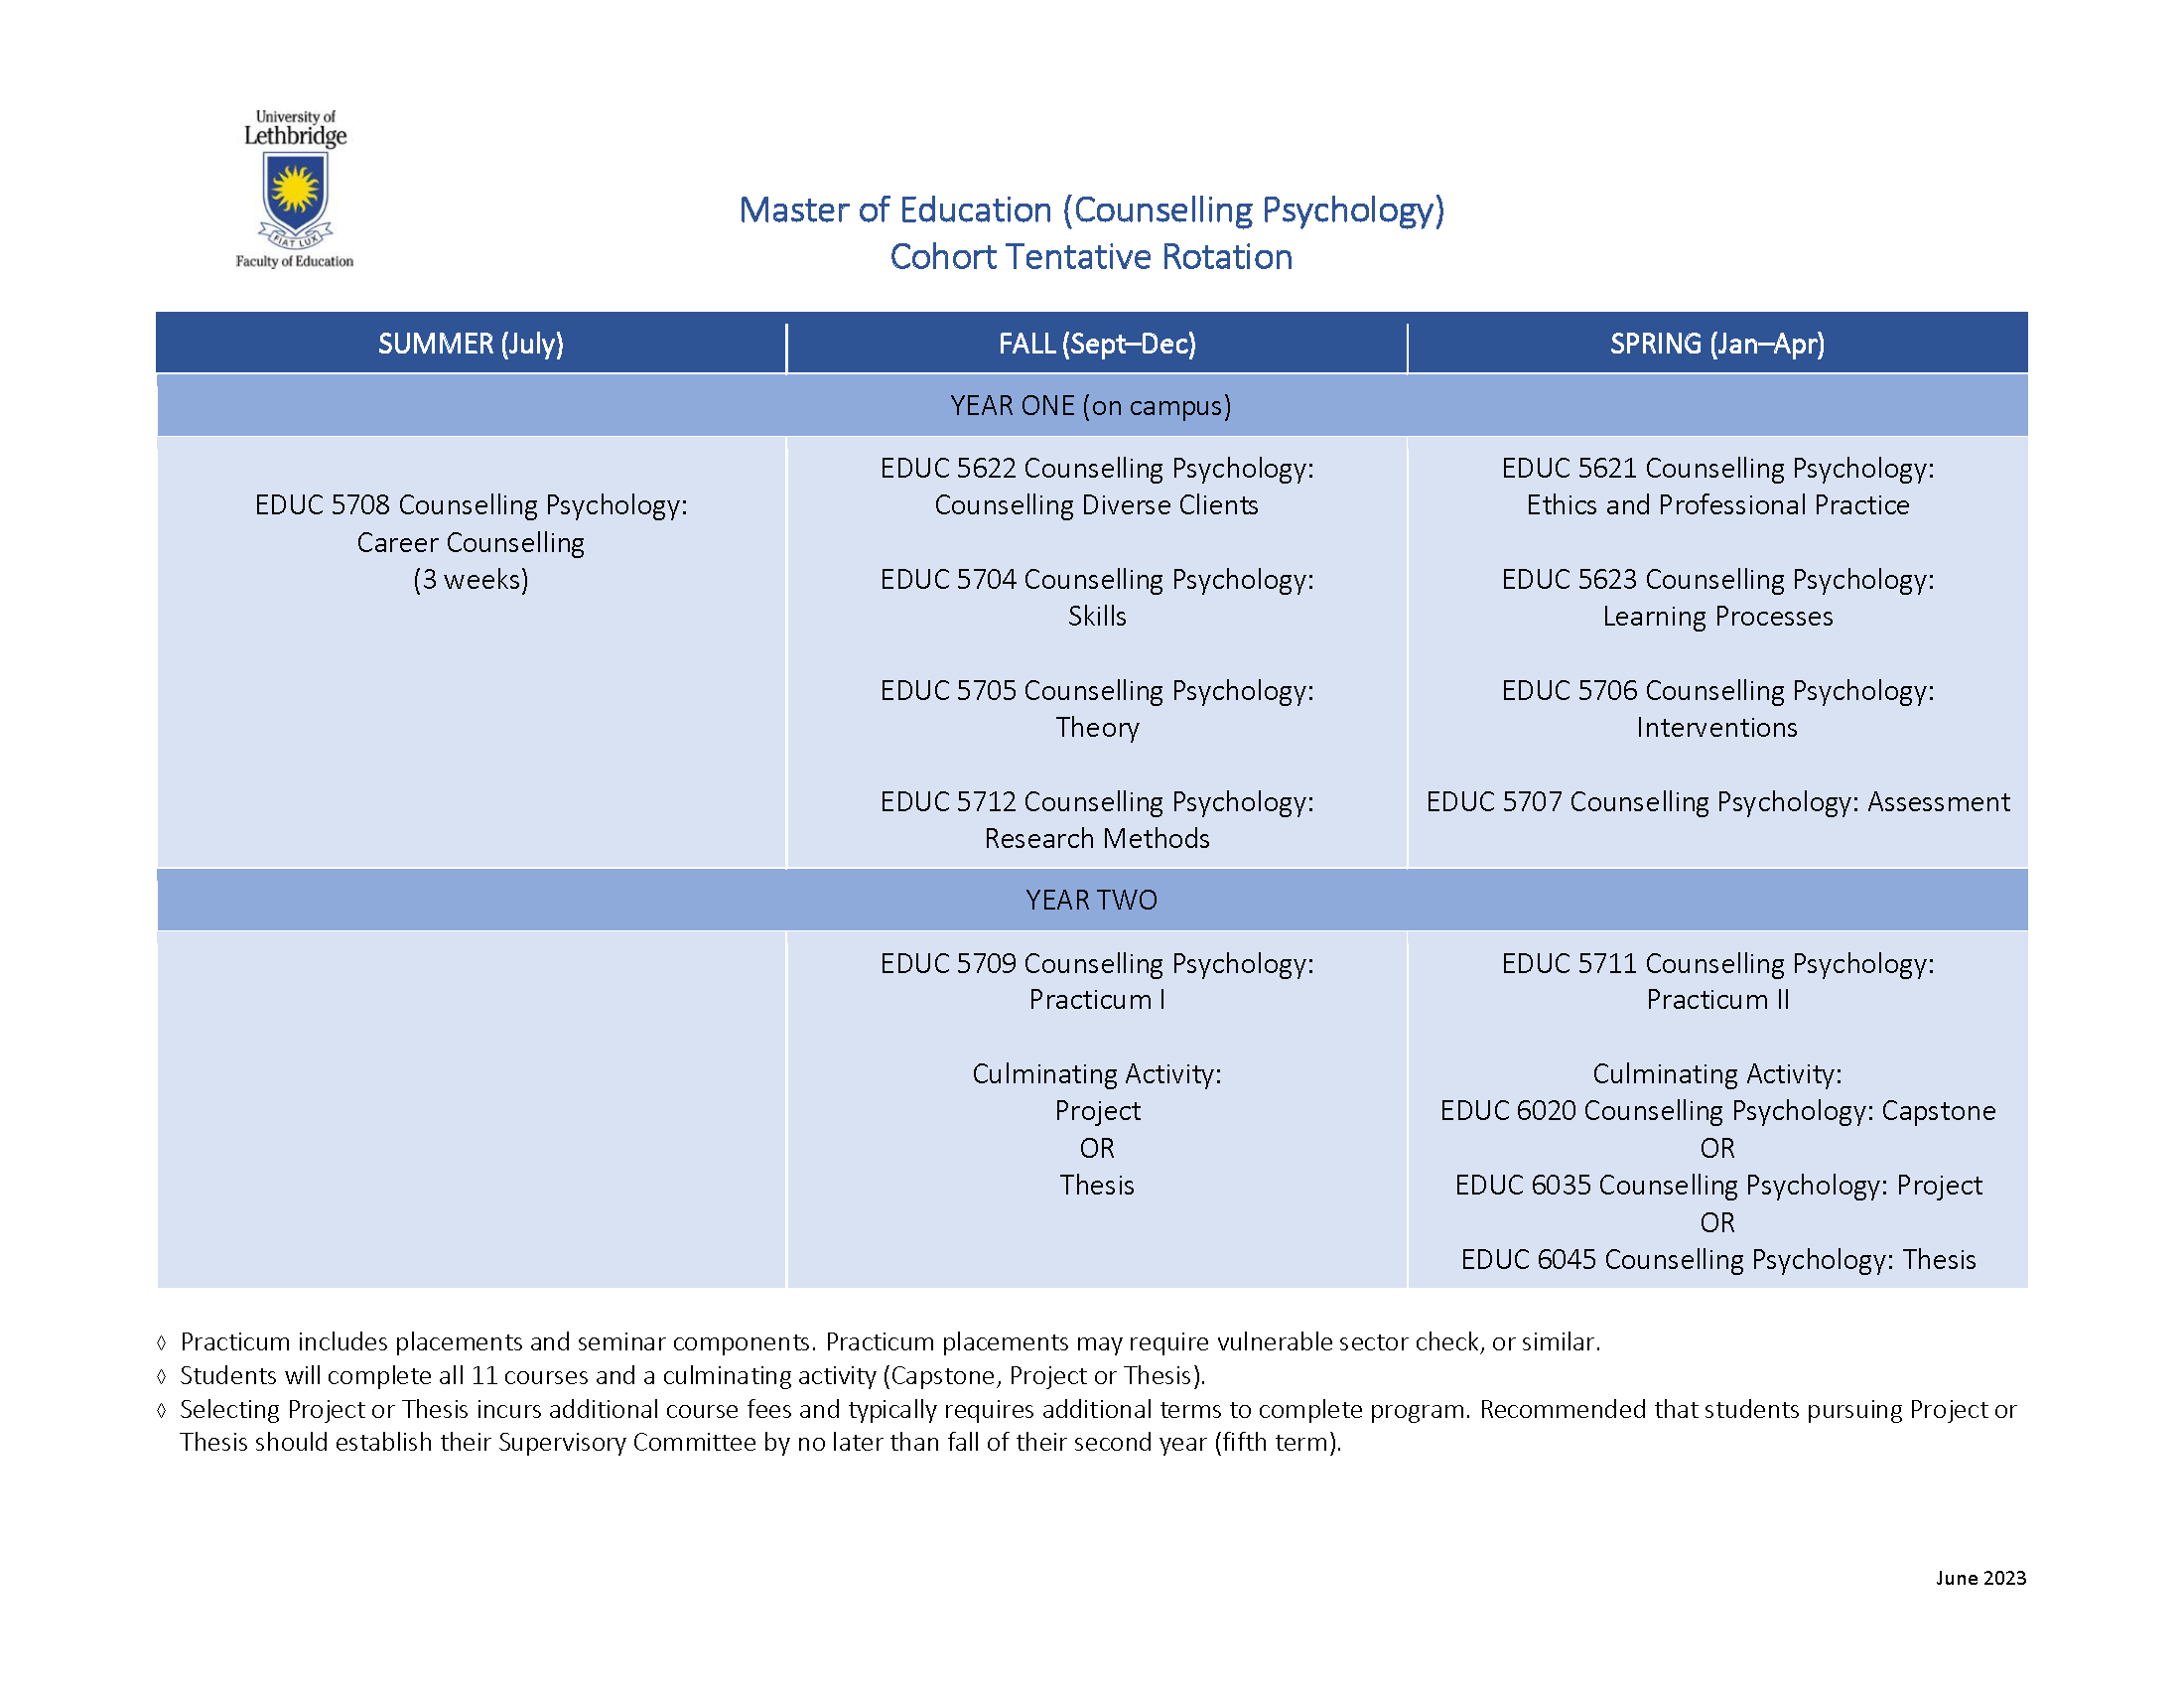 Master of Education (Counselling Psychology) cohort schedule chart